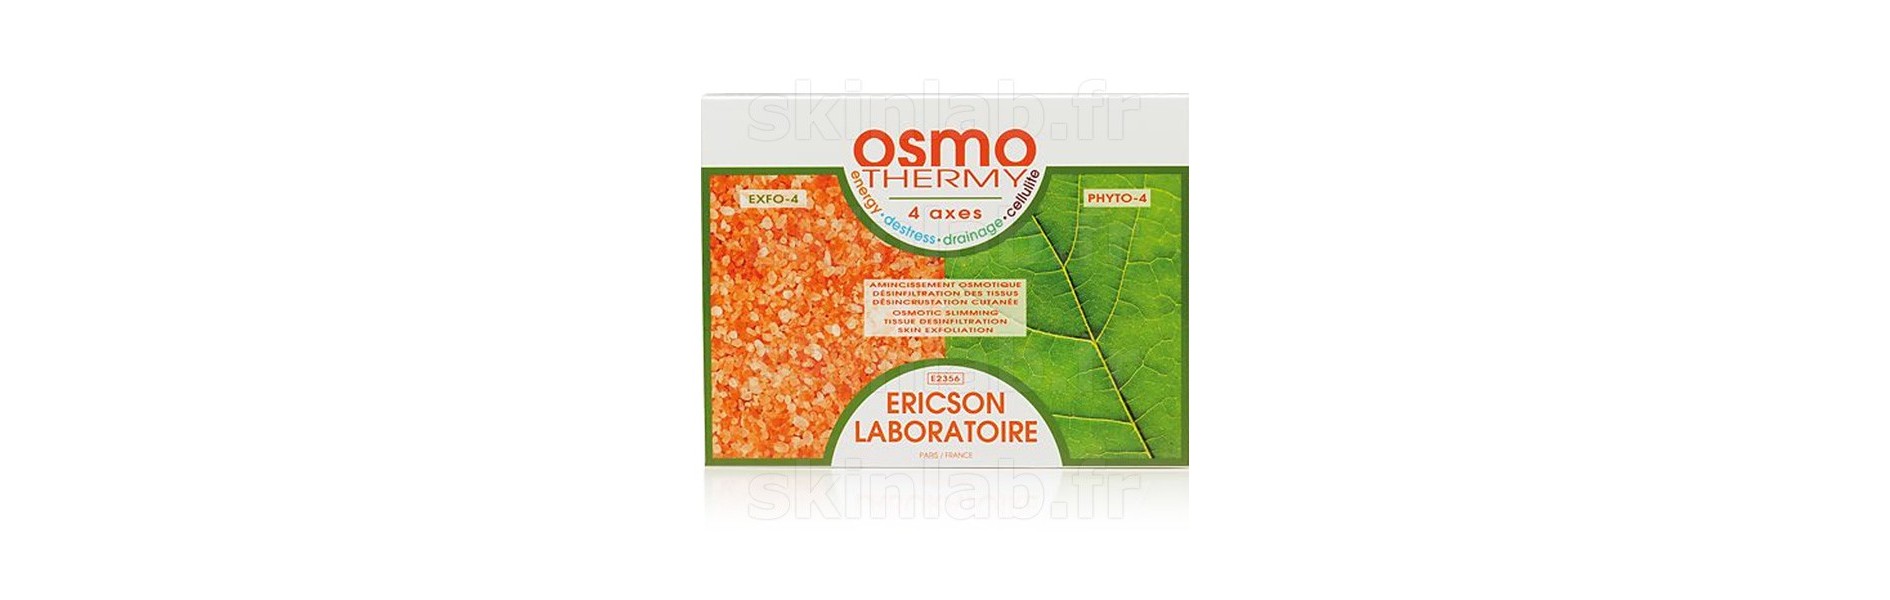 Cellulite lymphatique OSMO THERMY